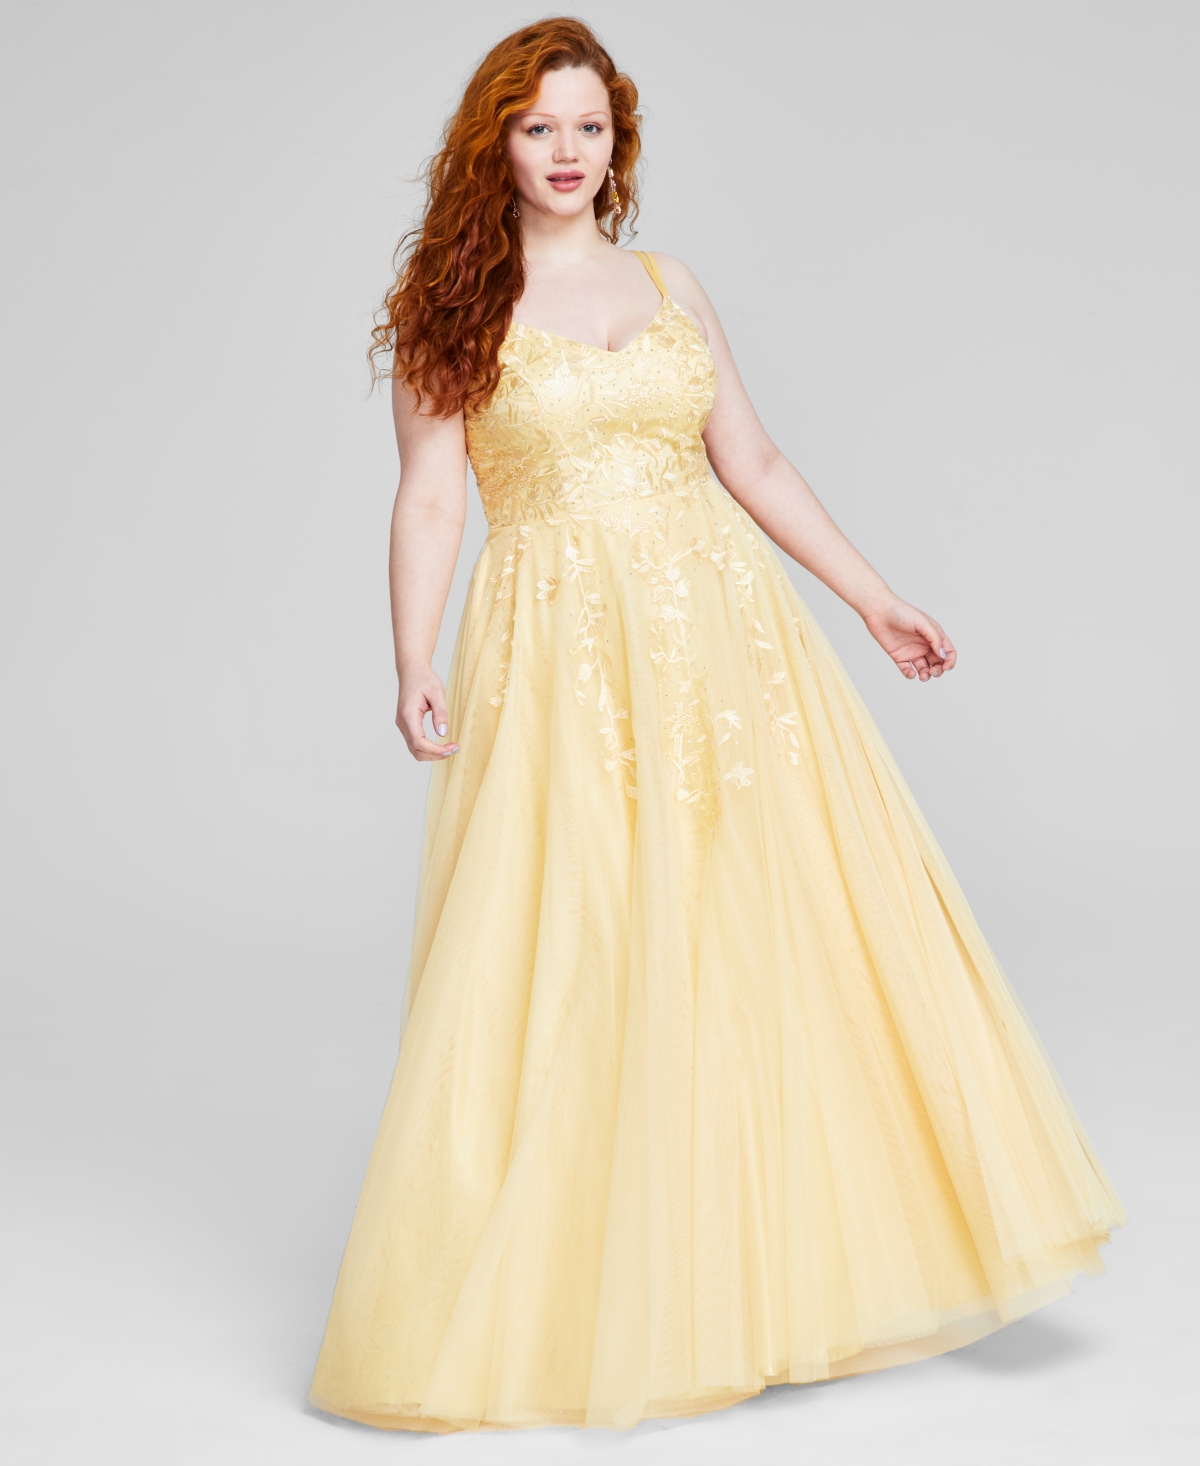 Trendy Plus Size Strappy Sequin Floral-Embroidery Ball Gown, Created for Macy's - Lemon